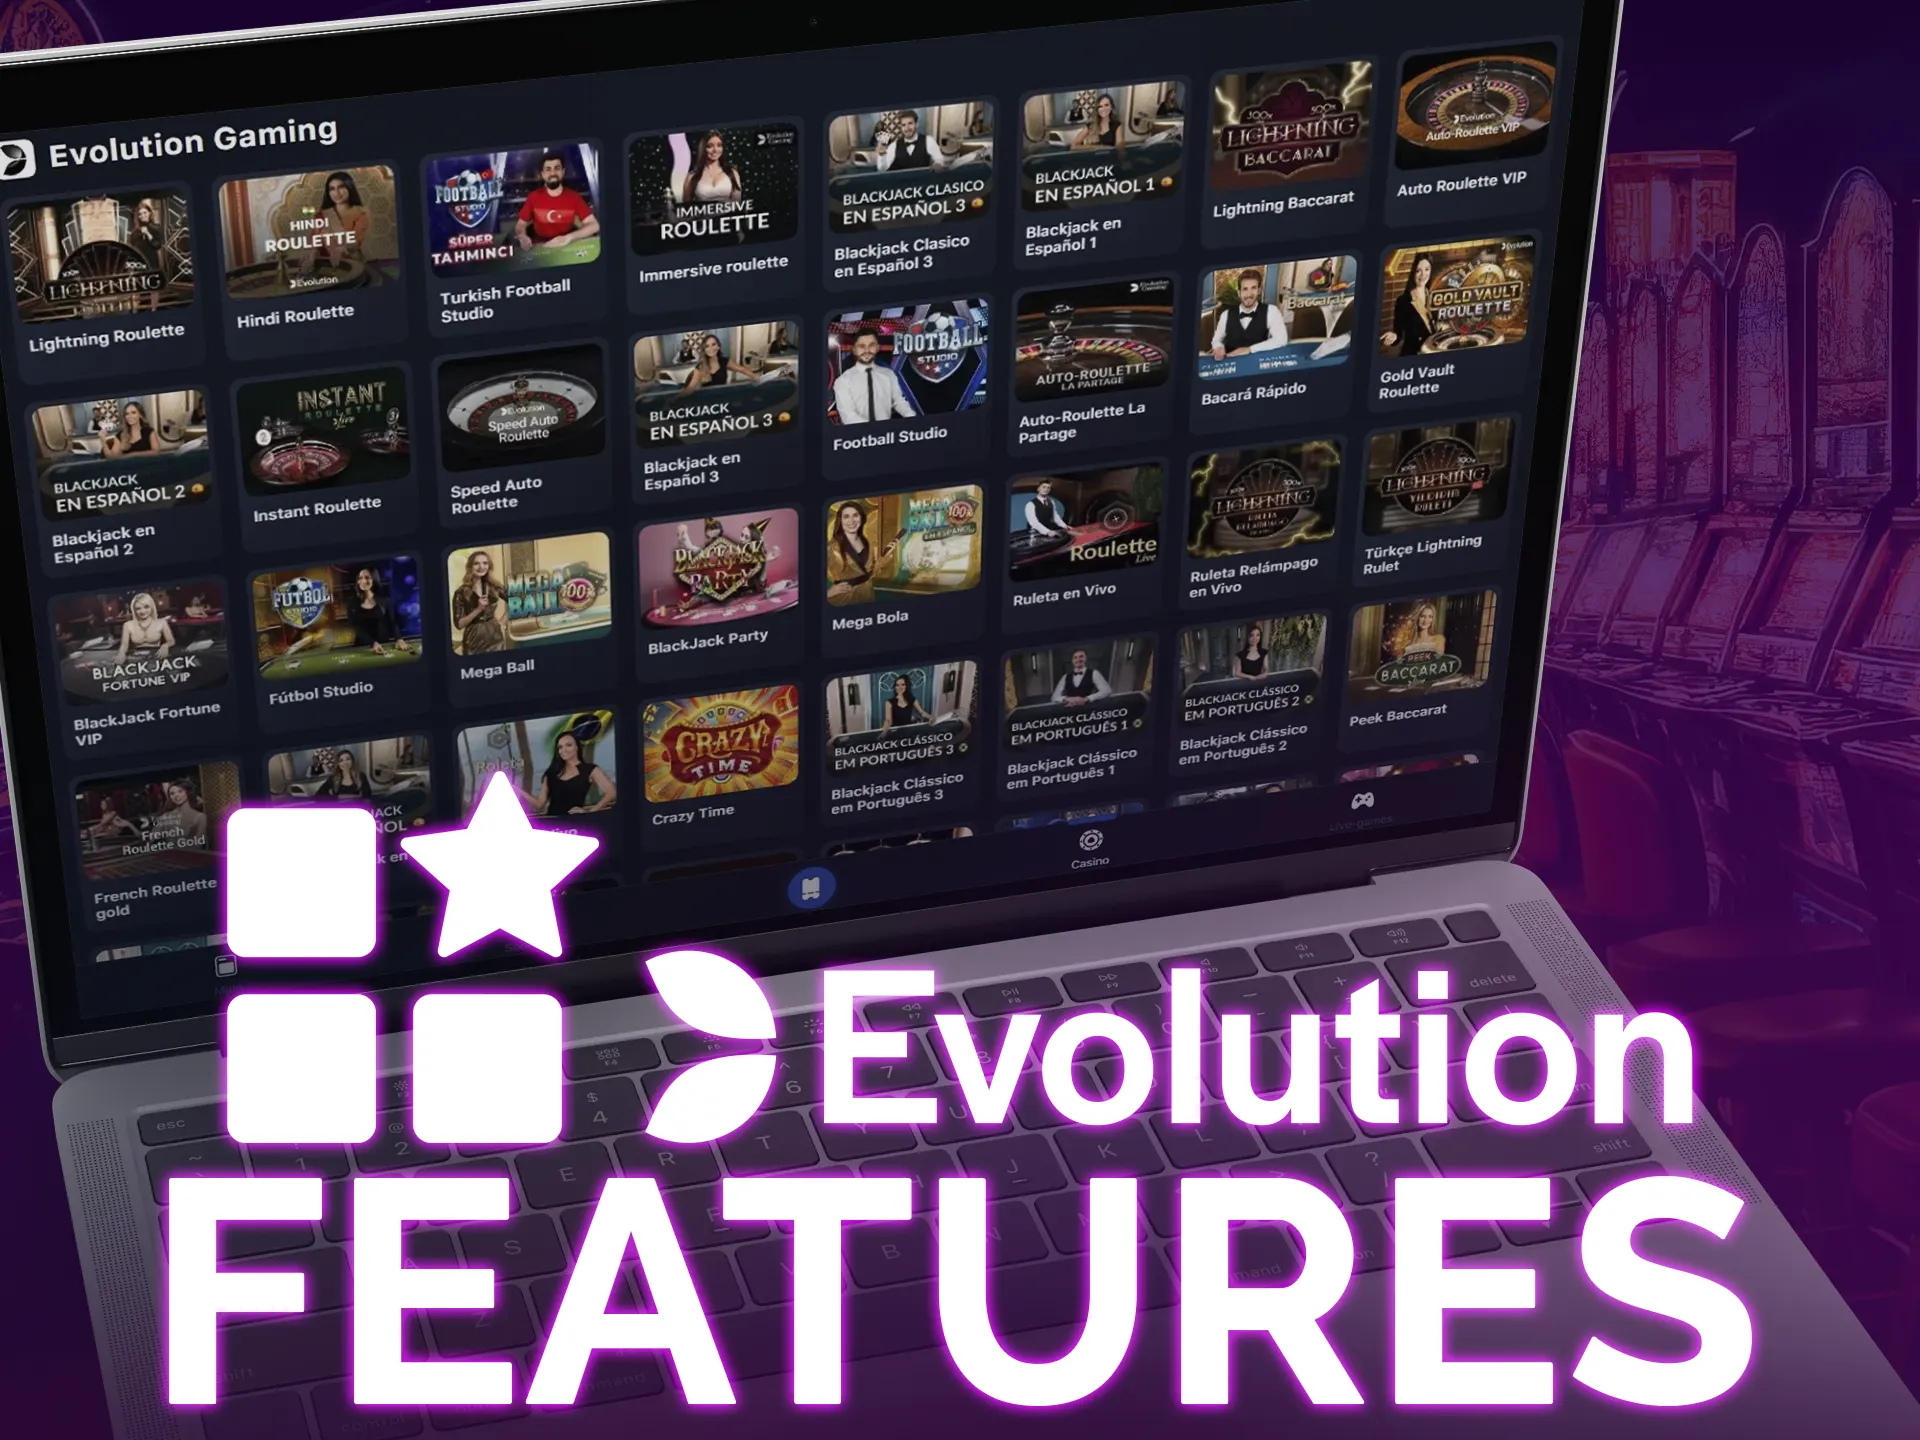 Evolution Gaming introduces engaging mechanics like bonus games, unique equipment, and interactive chats.